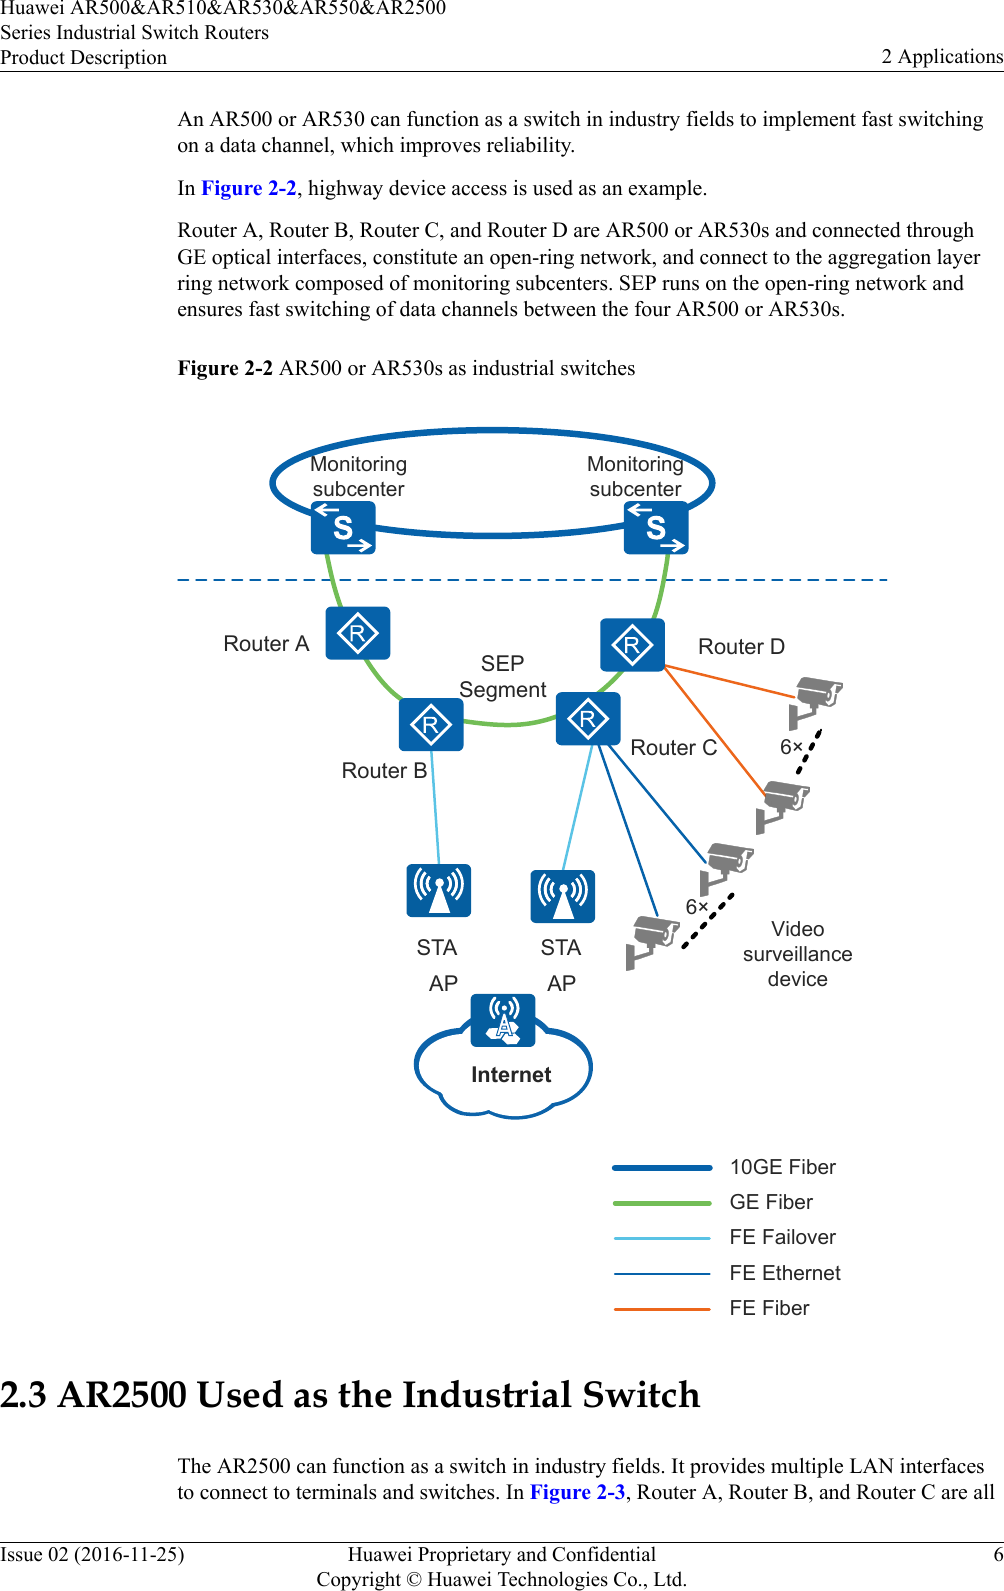 An AR500 or AR530 can function as a switch in industry fields to implement fast switchingon a data channel, which improves reliability.In Figure 2-2, highway device access is used as an example.Router A, Router B, Router C, and Router D are AR500 or AR530s and connected throughGE optical interfaces, constitute an open-ring network, and connect to the aggregation layerring network composed of monitoring subcenters. SEP runs on the open-ring network andensures fast switching of data channels between the four AR500 or AR530s.Figure 2-2 AR500 or AR530s as industrial switchesMonitoring subcenterMonitoring subcenterVideo surveillance device10GE FiberFE FiberFE EthernetFE FailoverGE FiberSEPSegment6×AP AP6×Router CRouter BRouter A Router DSTA STAInternet2.3 AR2500 Used as the Industrial SwitchThe AR2500 can function as a switch in industry fields. It provides multiple LAN interfacesto connect to terminals and switches. In Figure 2-3, Router A, Router B, and Router C are allHuawei AR500&amp;AR510&amp;AR530&amp;AR550&amp;AR2500Series Industrial Switch RoutersProduct Description 2 ApplicationsIssue 02 (2016-11-25) Huawei Proprietary and ConfidentialCopyright © Huawei Technologies Co., Ltd.6